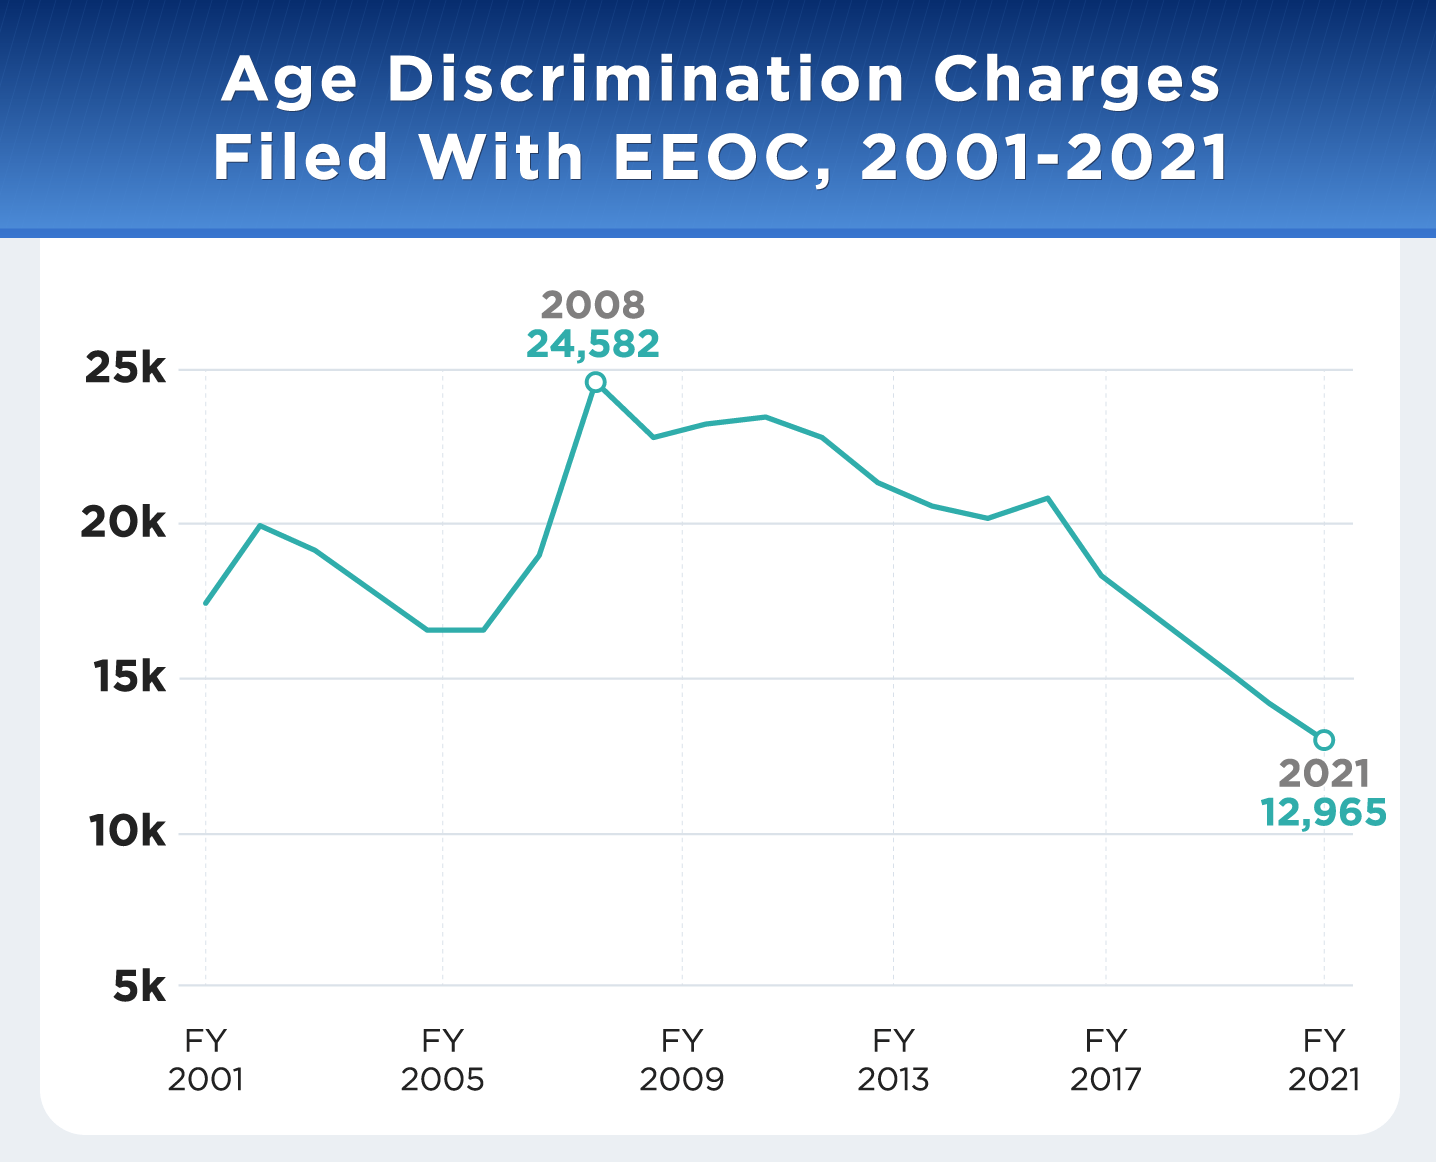 Age Discrimination Charges Filed with EEOC from 2001 to 2021